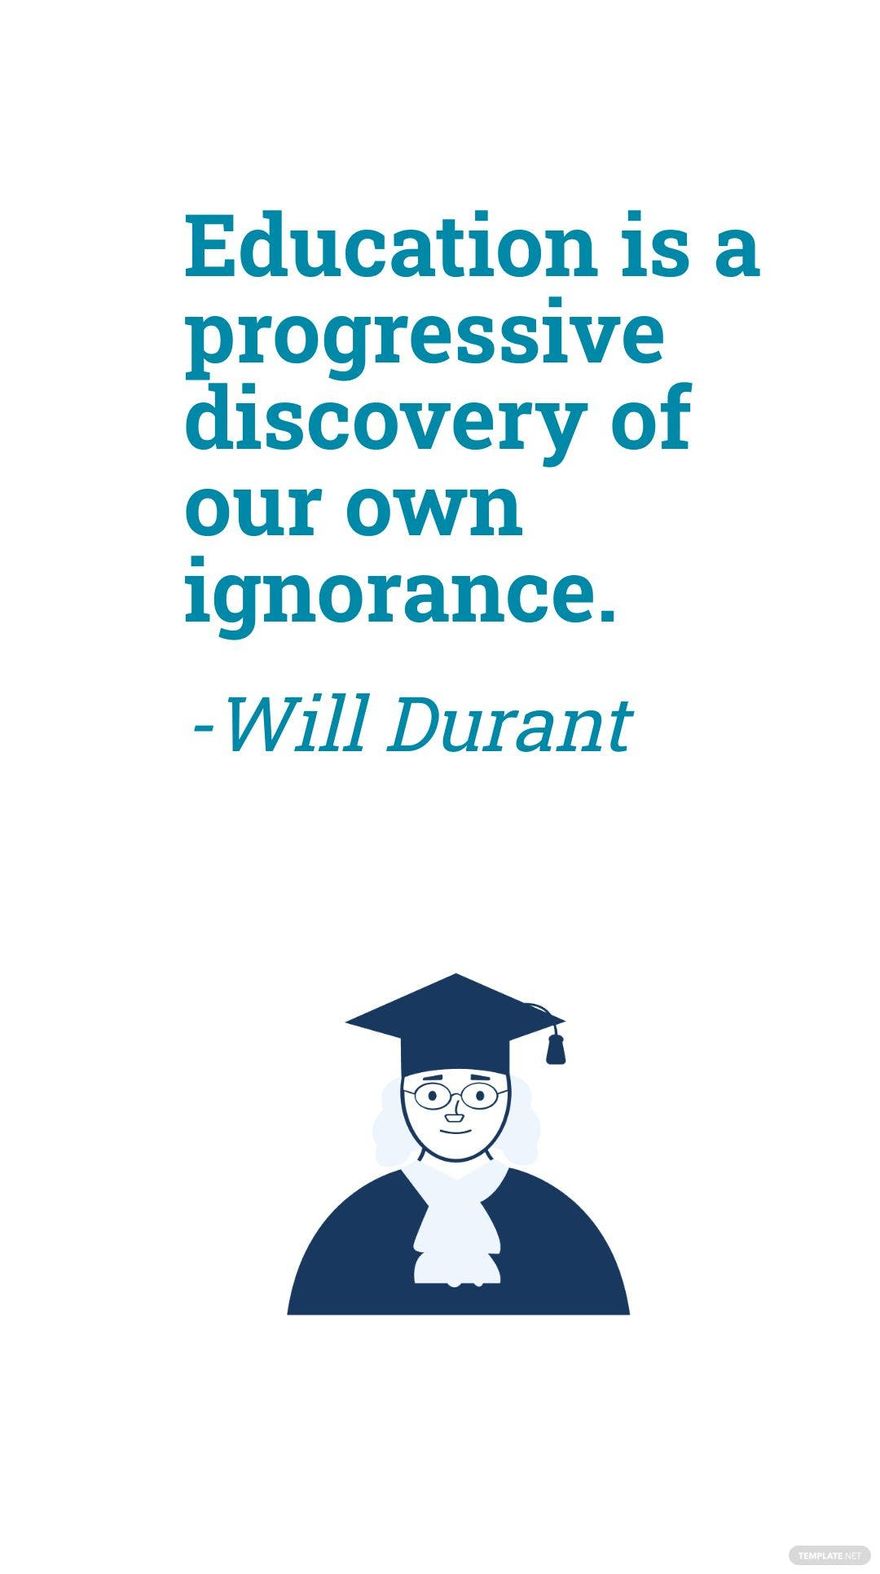 Free Will Durant - Education is a progressive discovery of our own ignorance. in JPG